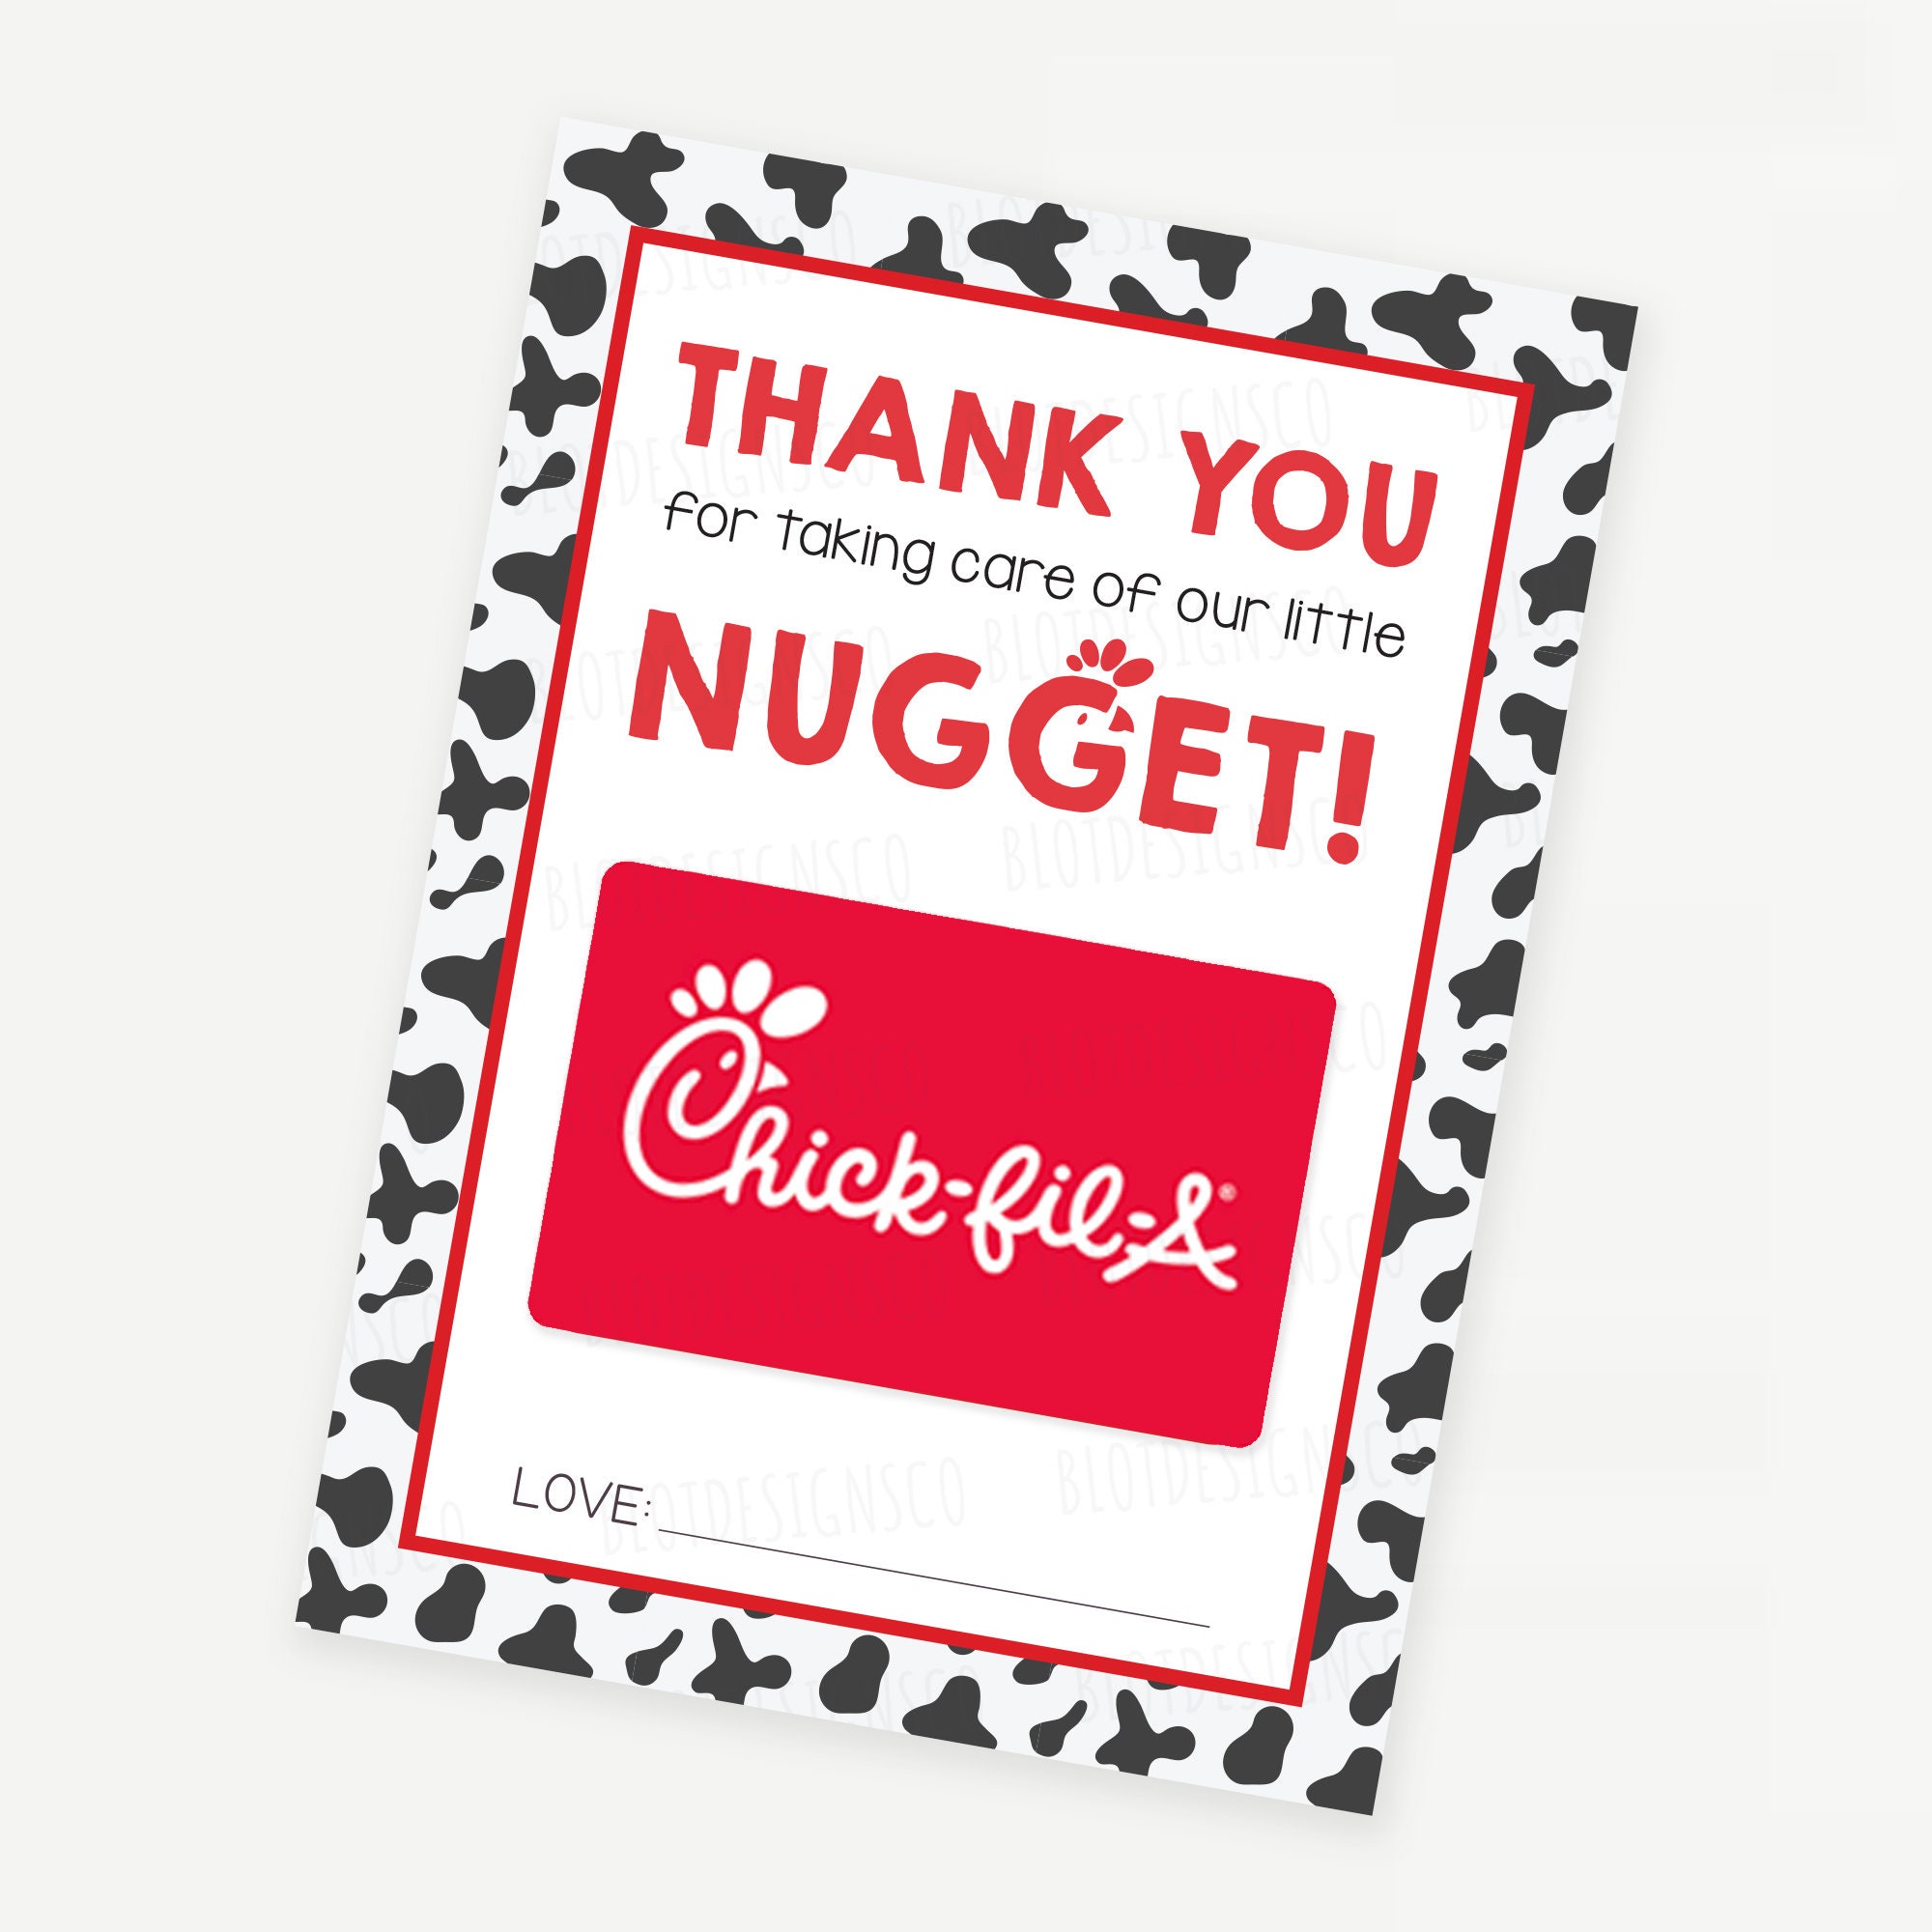 teacher-appreciation-chick-fil-a-gift-gift-card-holder-thanks-etsy